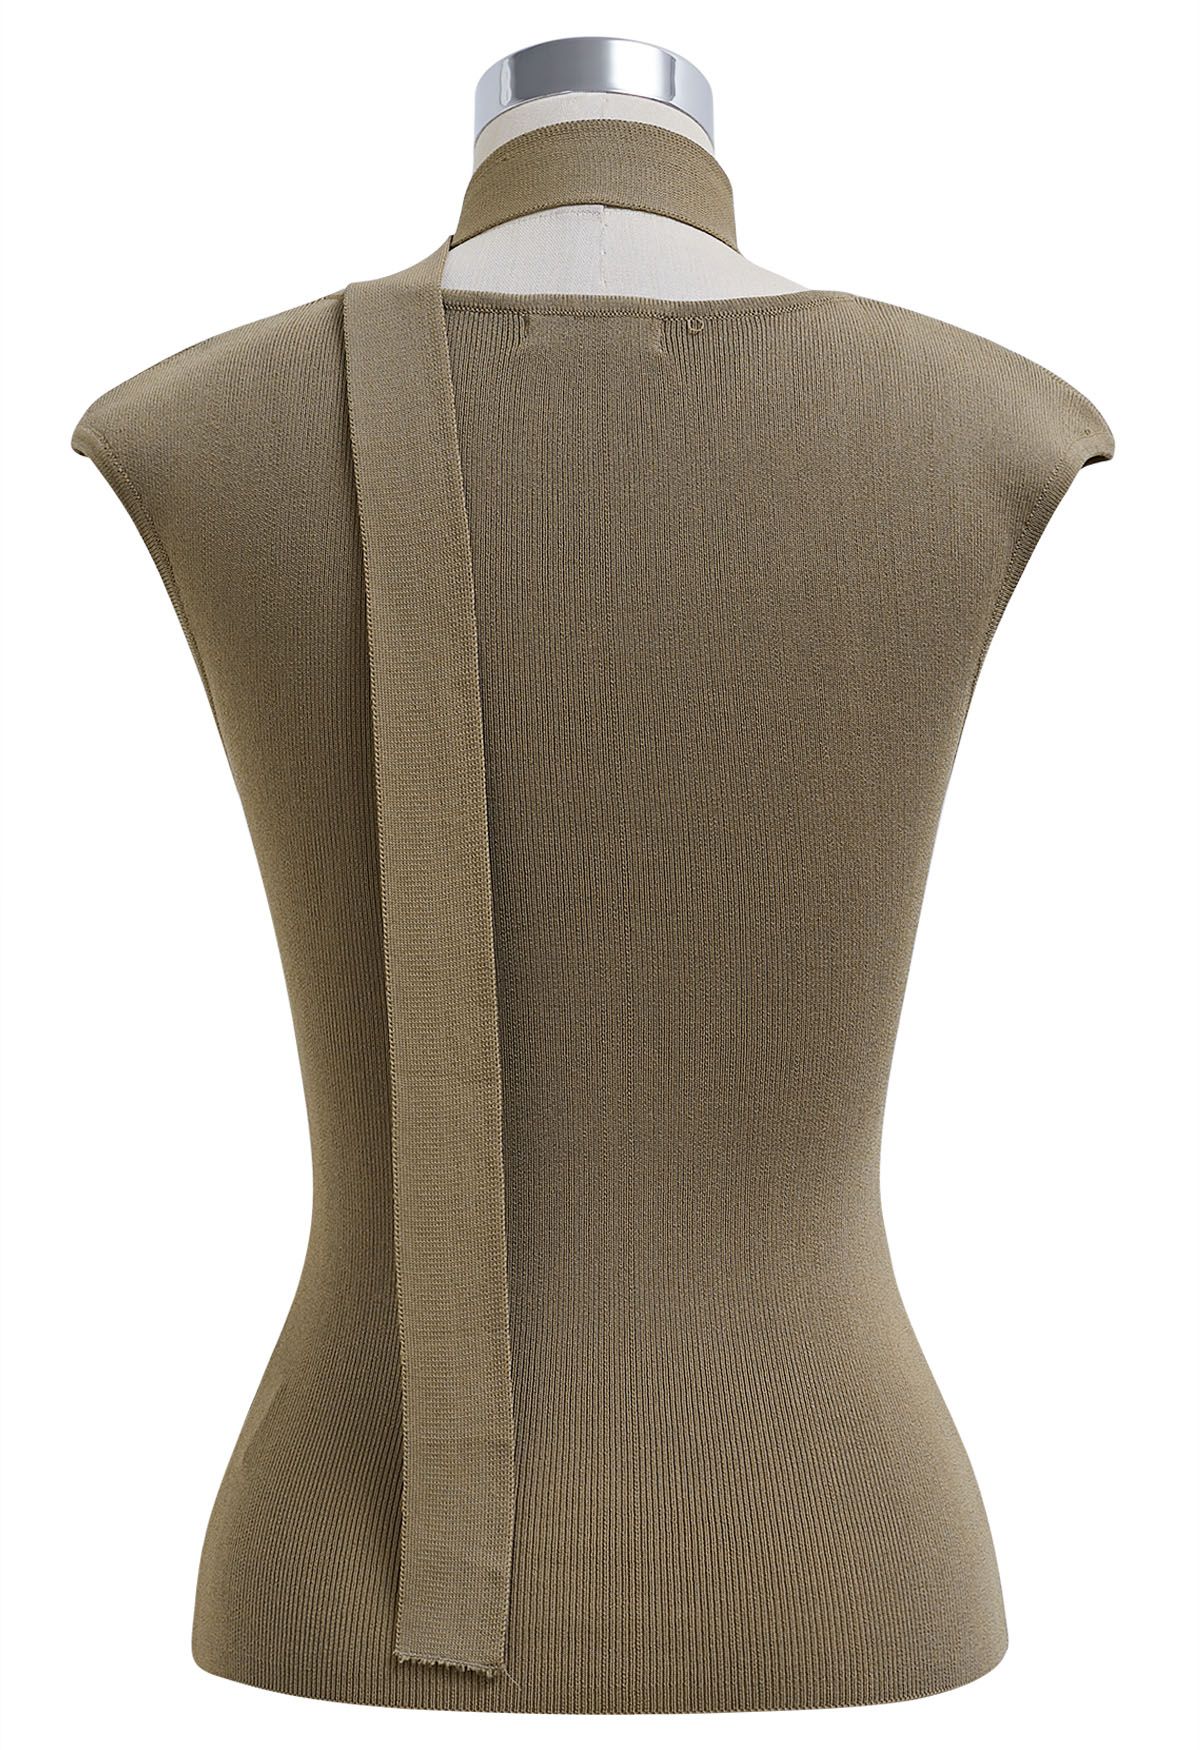 Square Neck Sleeveless Knit Top with Sash in Olive